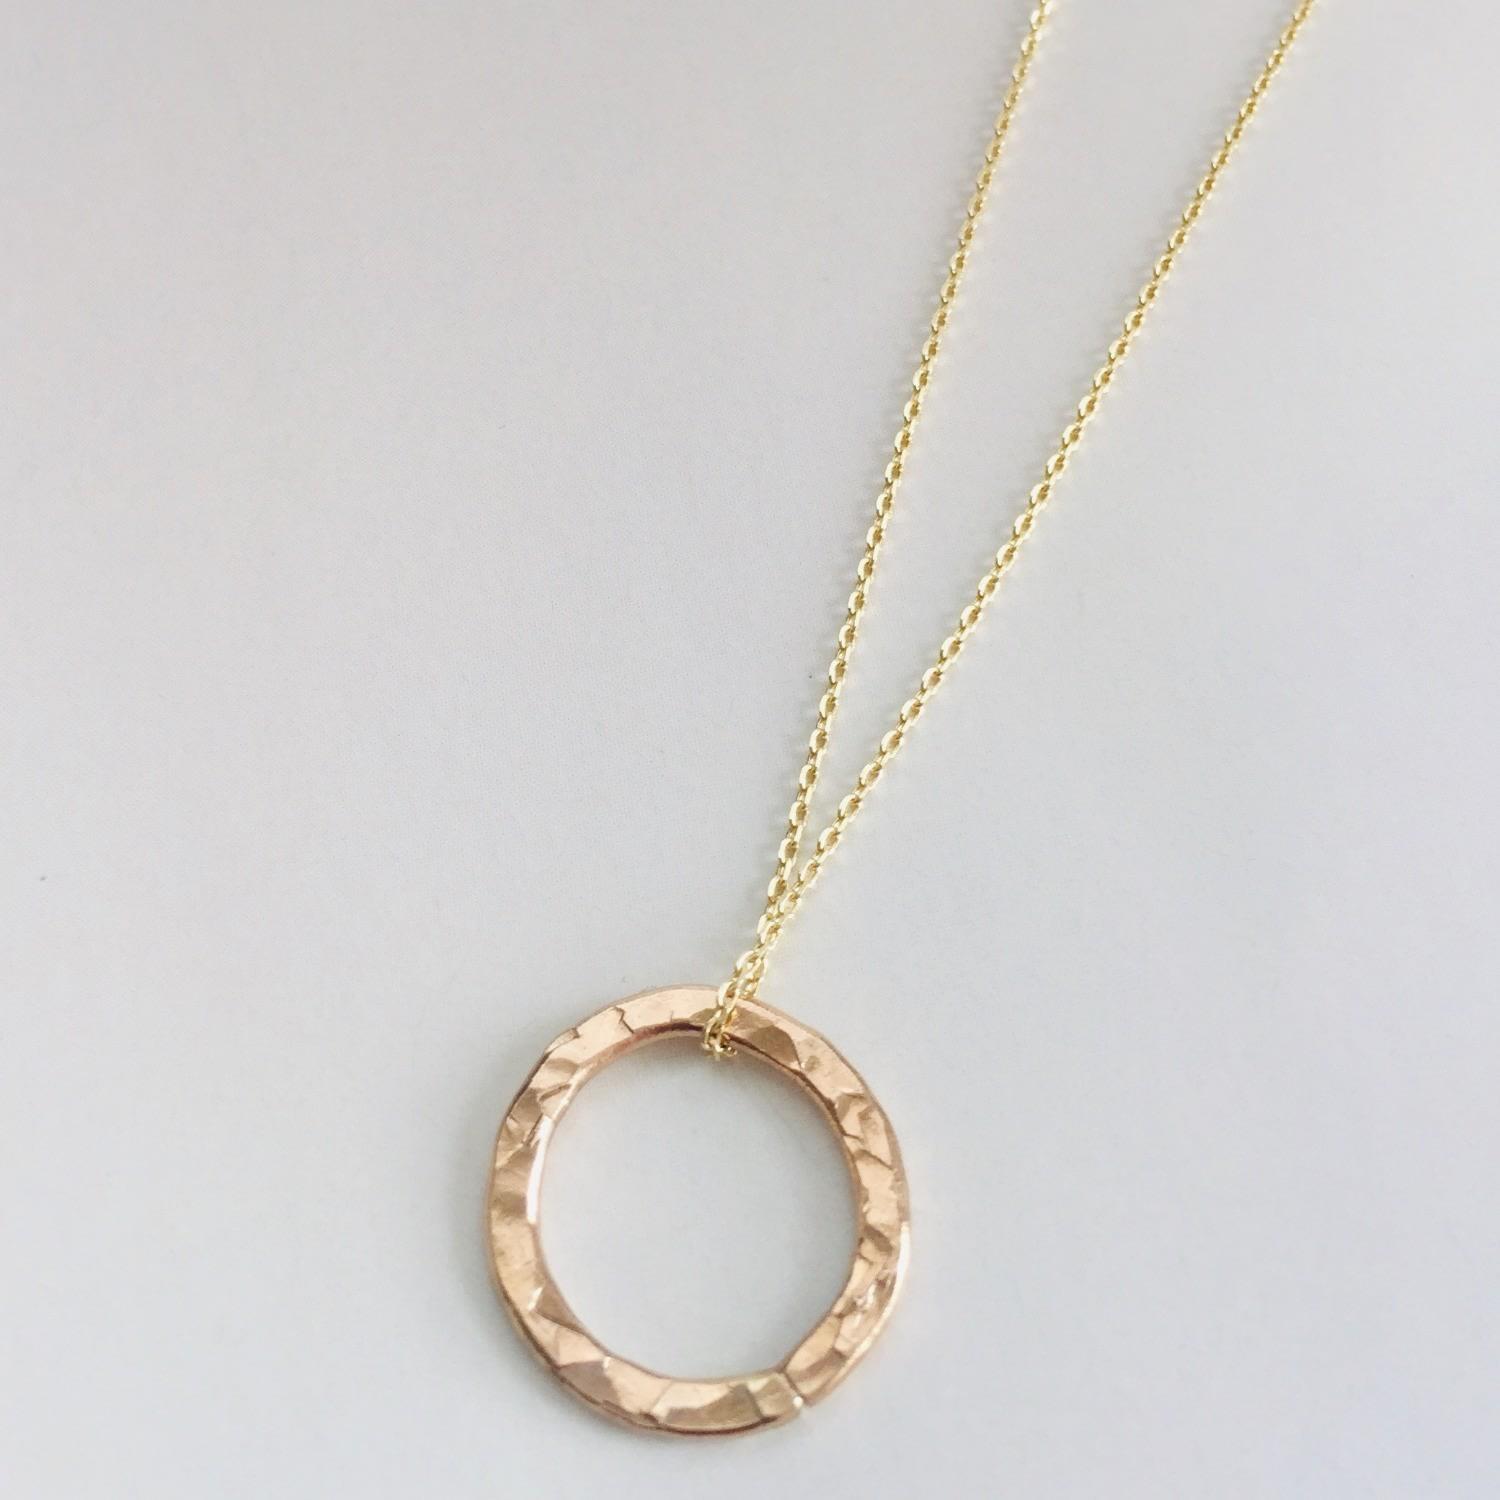 Lily Flo Jewellery Classic Karma Circle Gold Necklace in Metallic - Lyst